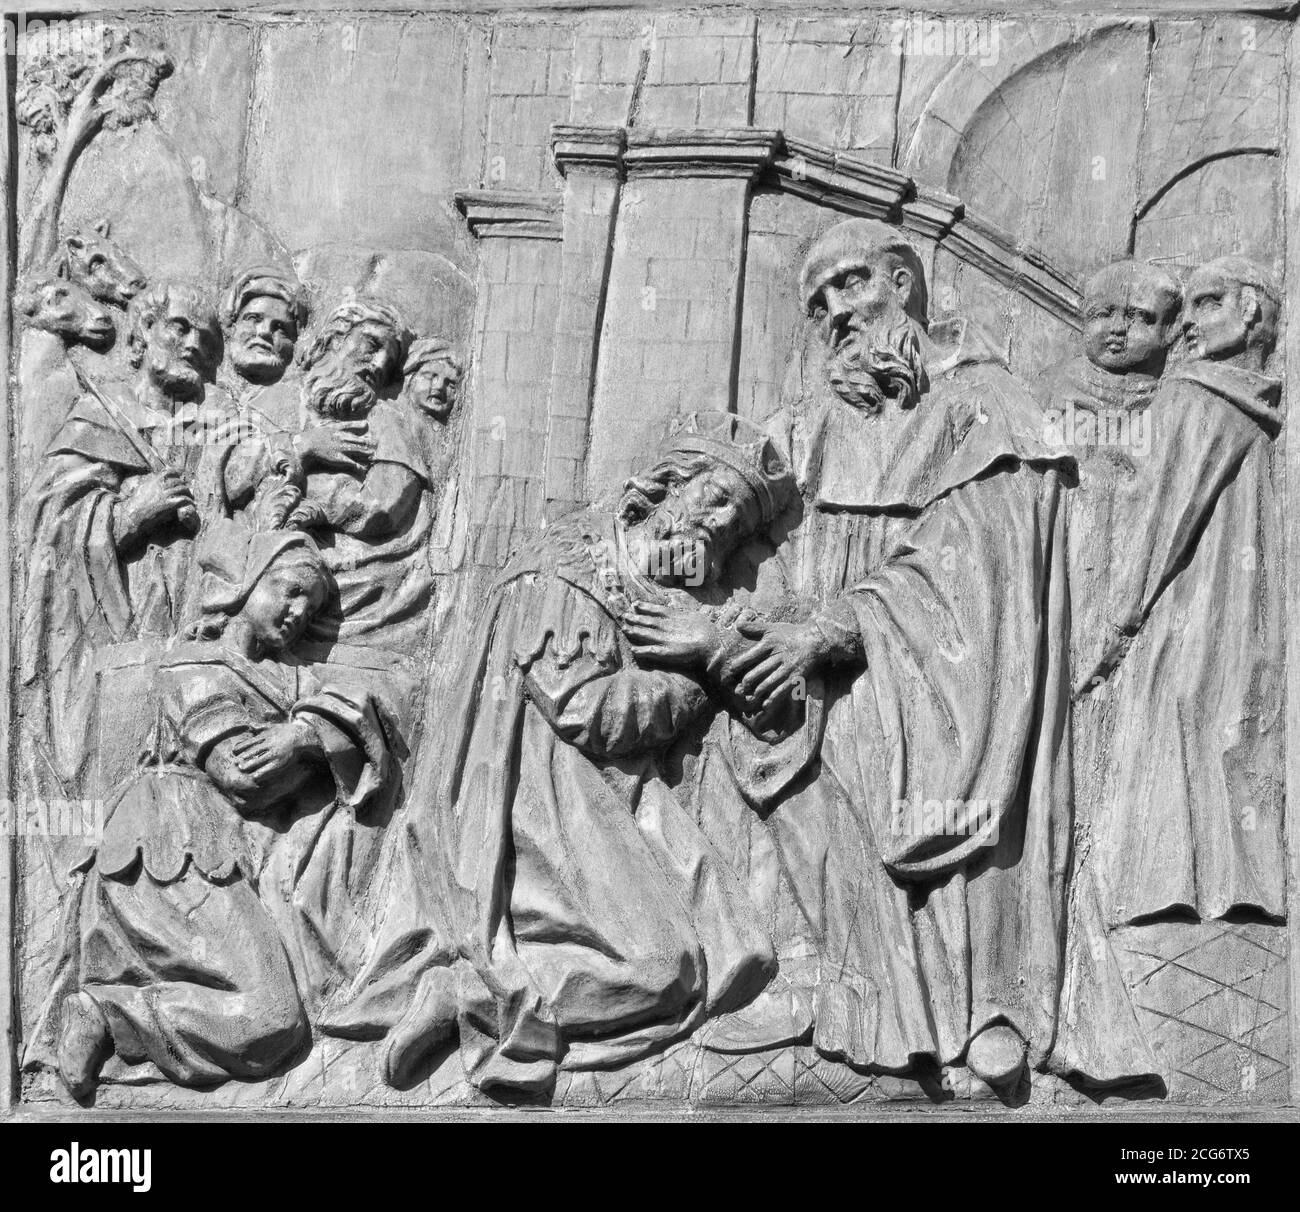 CATANIA, ITALY - APRIL 7, 2018: The baroque carved relief from live of St. Benedict (with the Totila king of Ostrogoths) Stock Photo